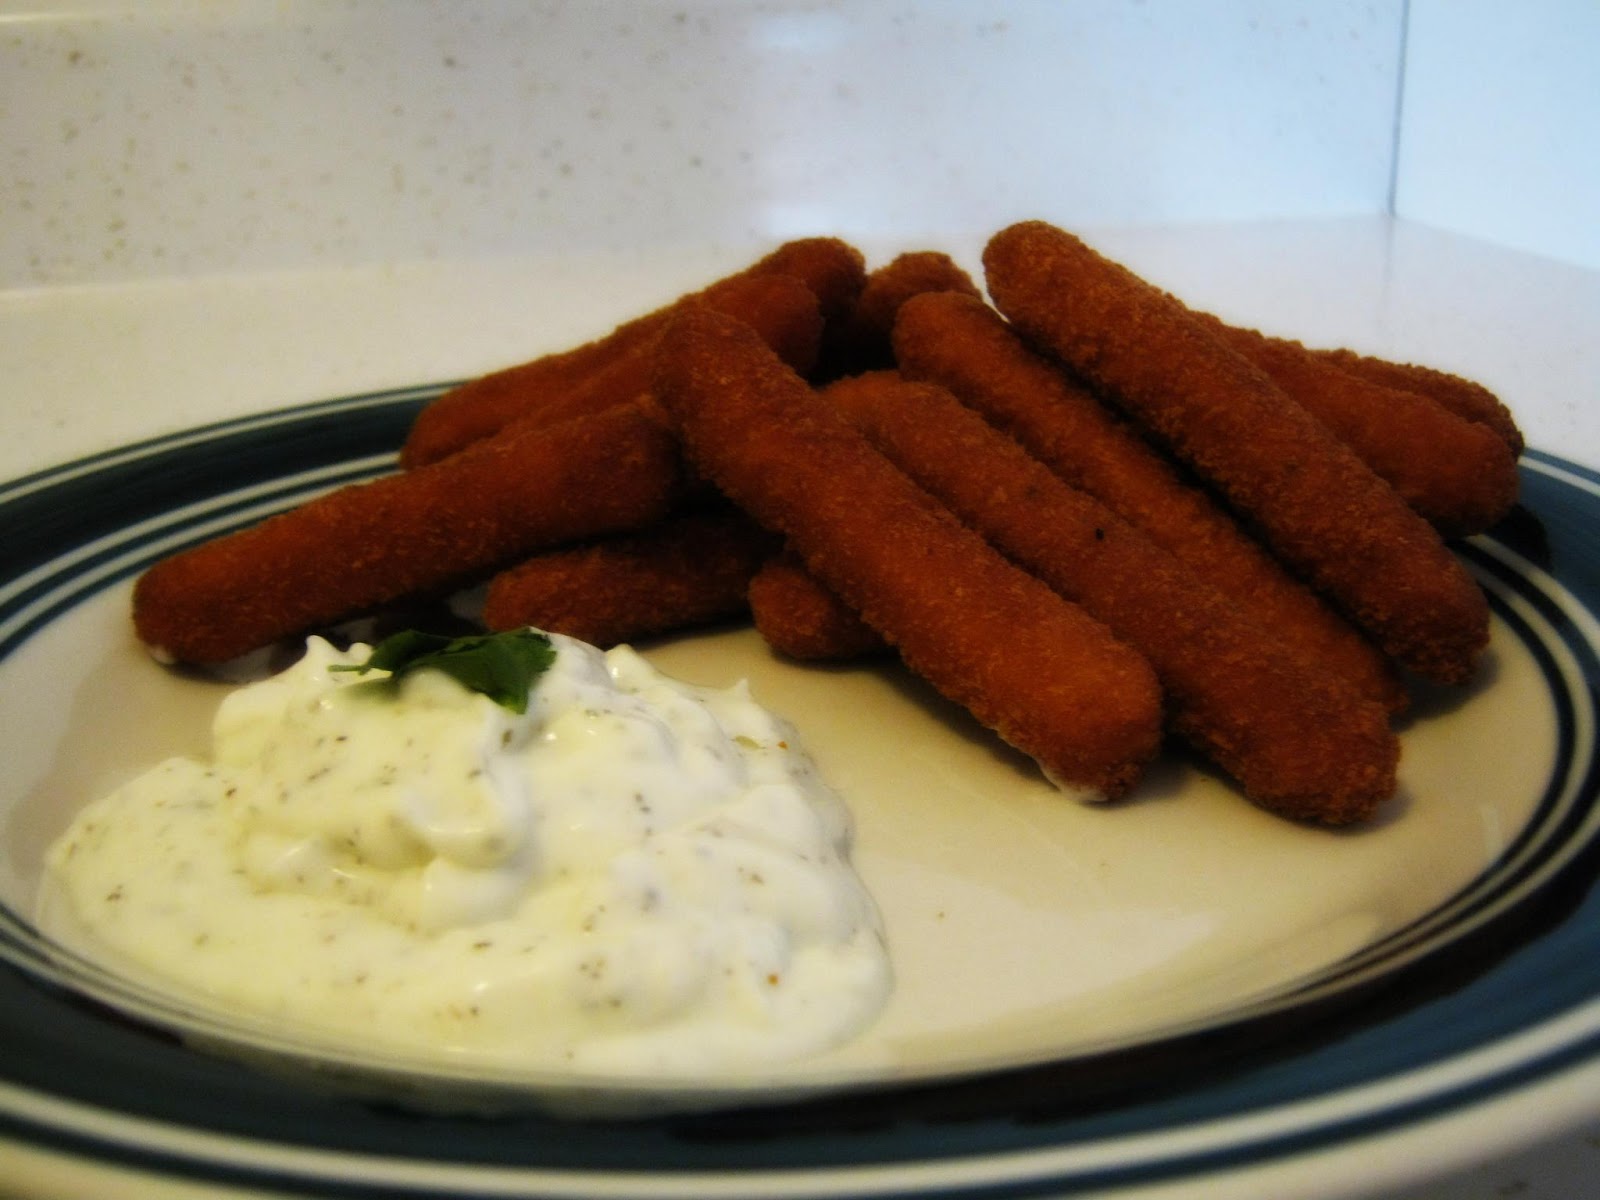 Fish Stick with Curd Dip